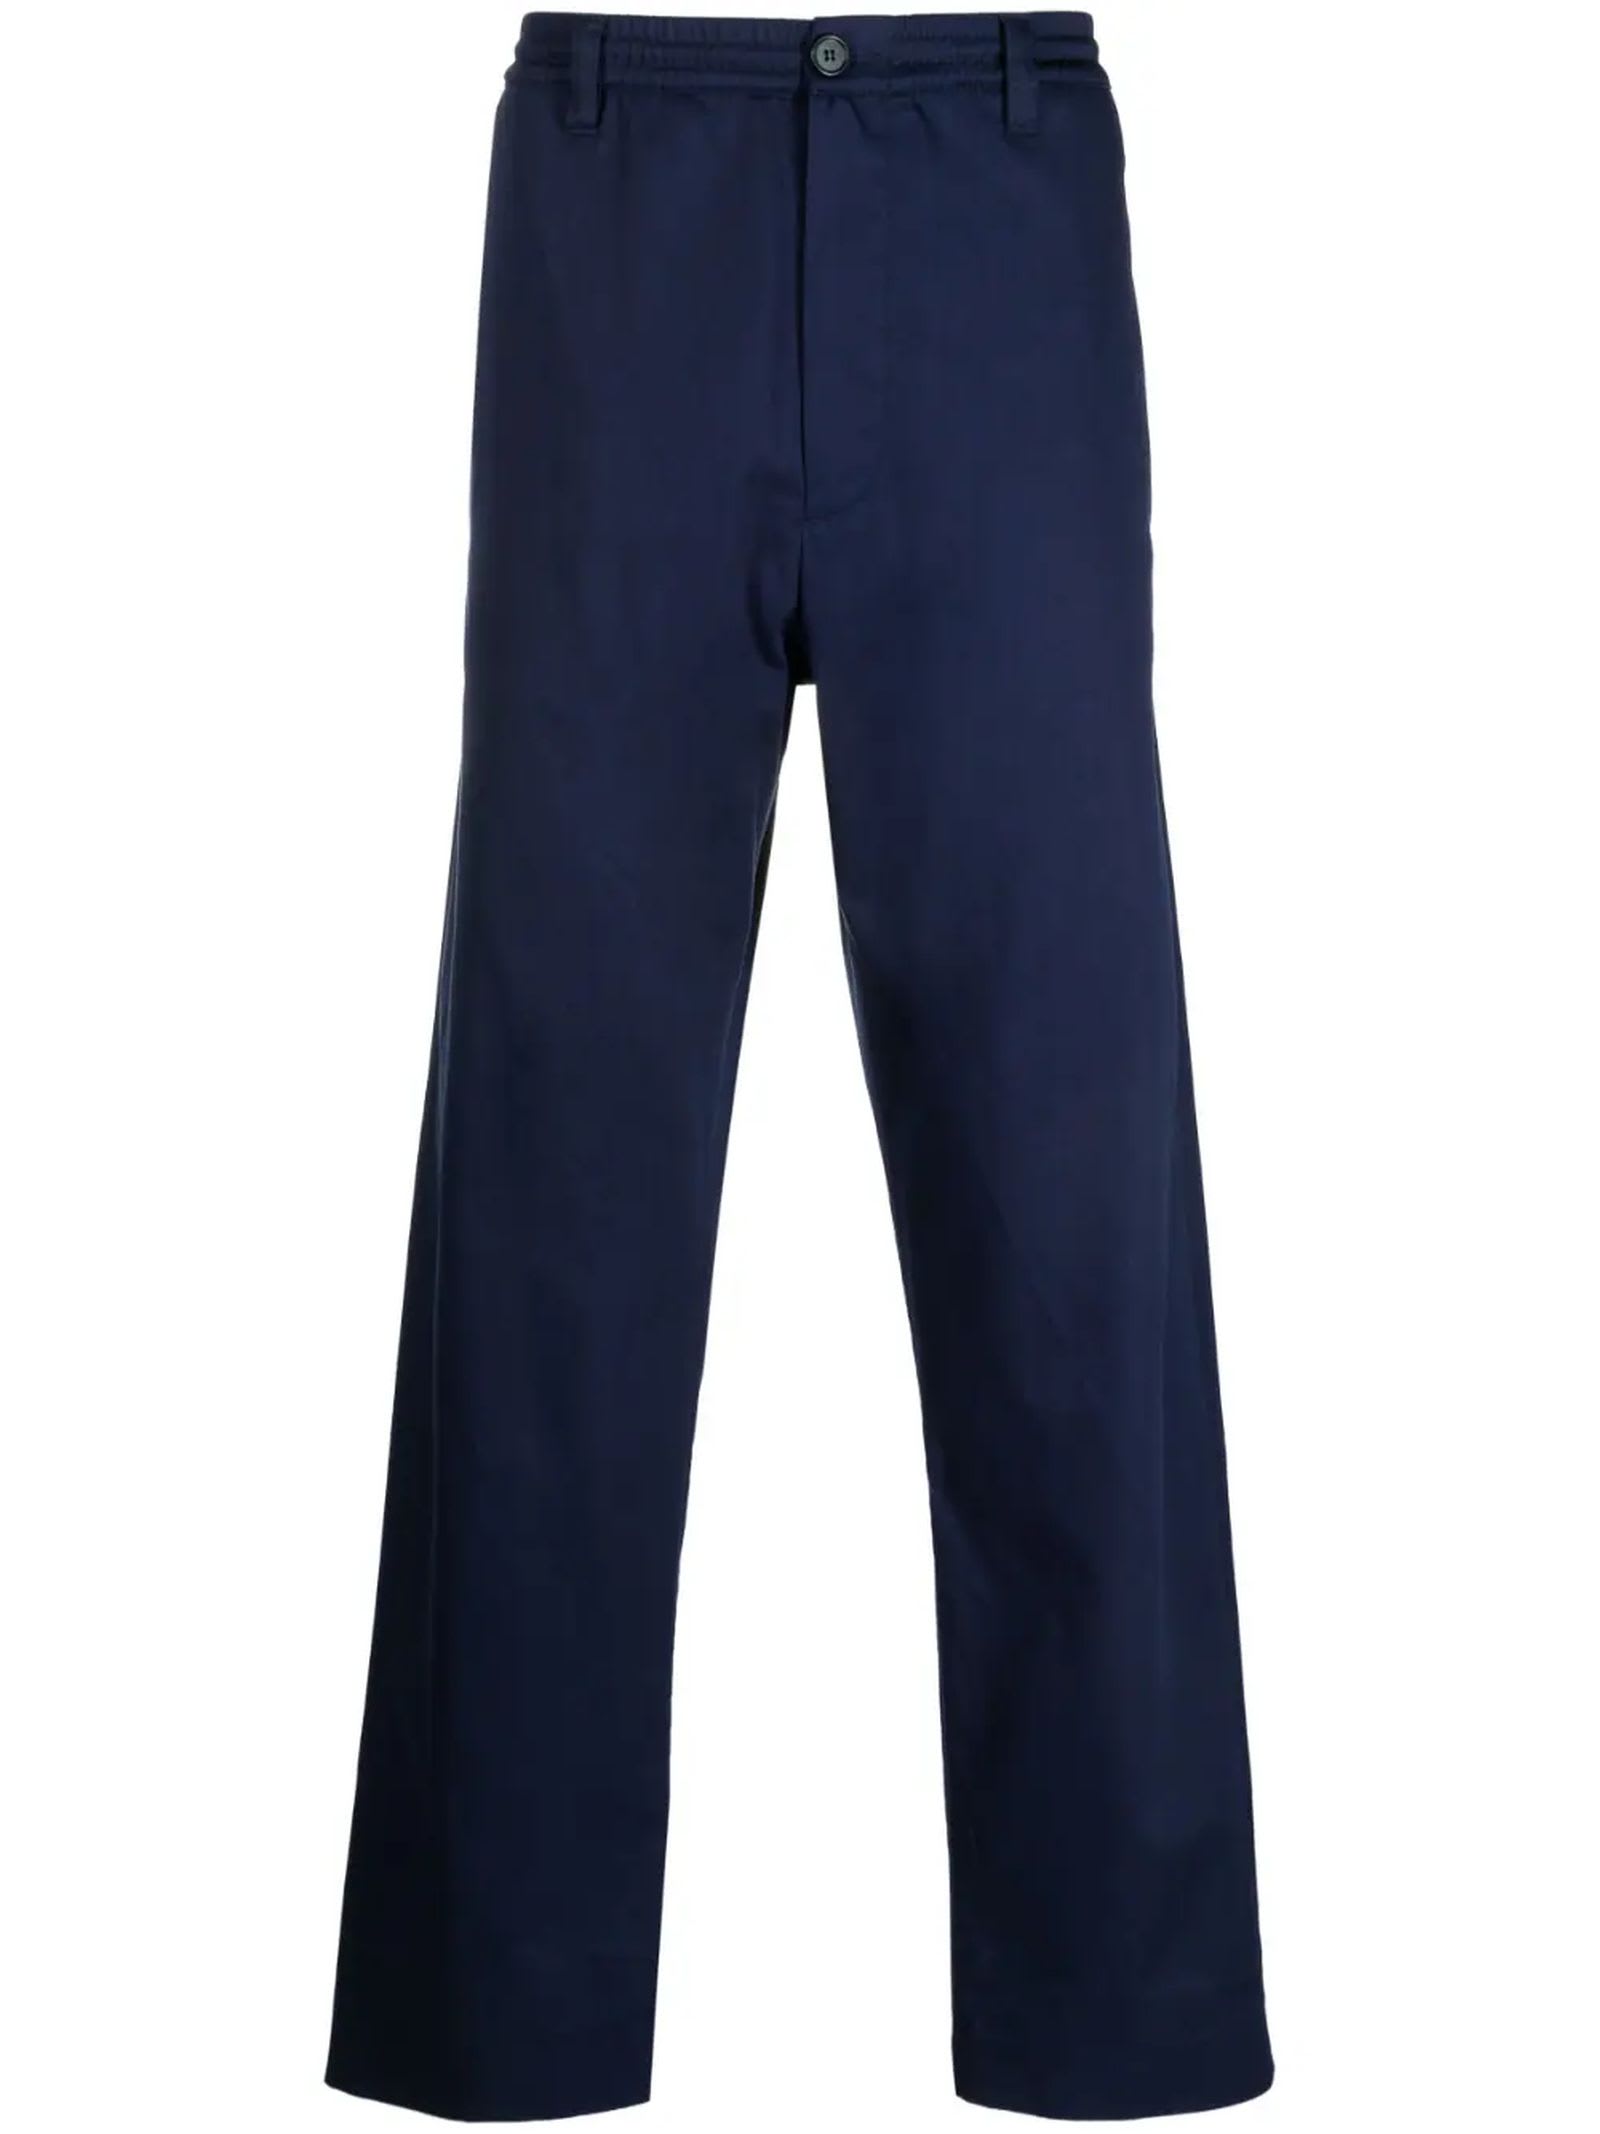 MARNI NAVY BLUE COTTON TROUSERS